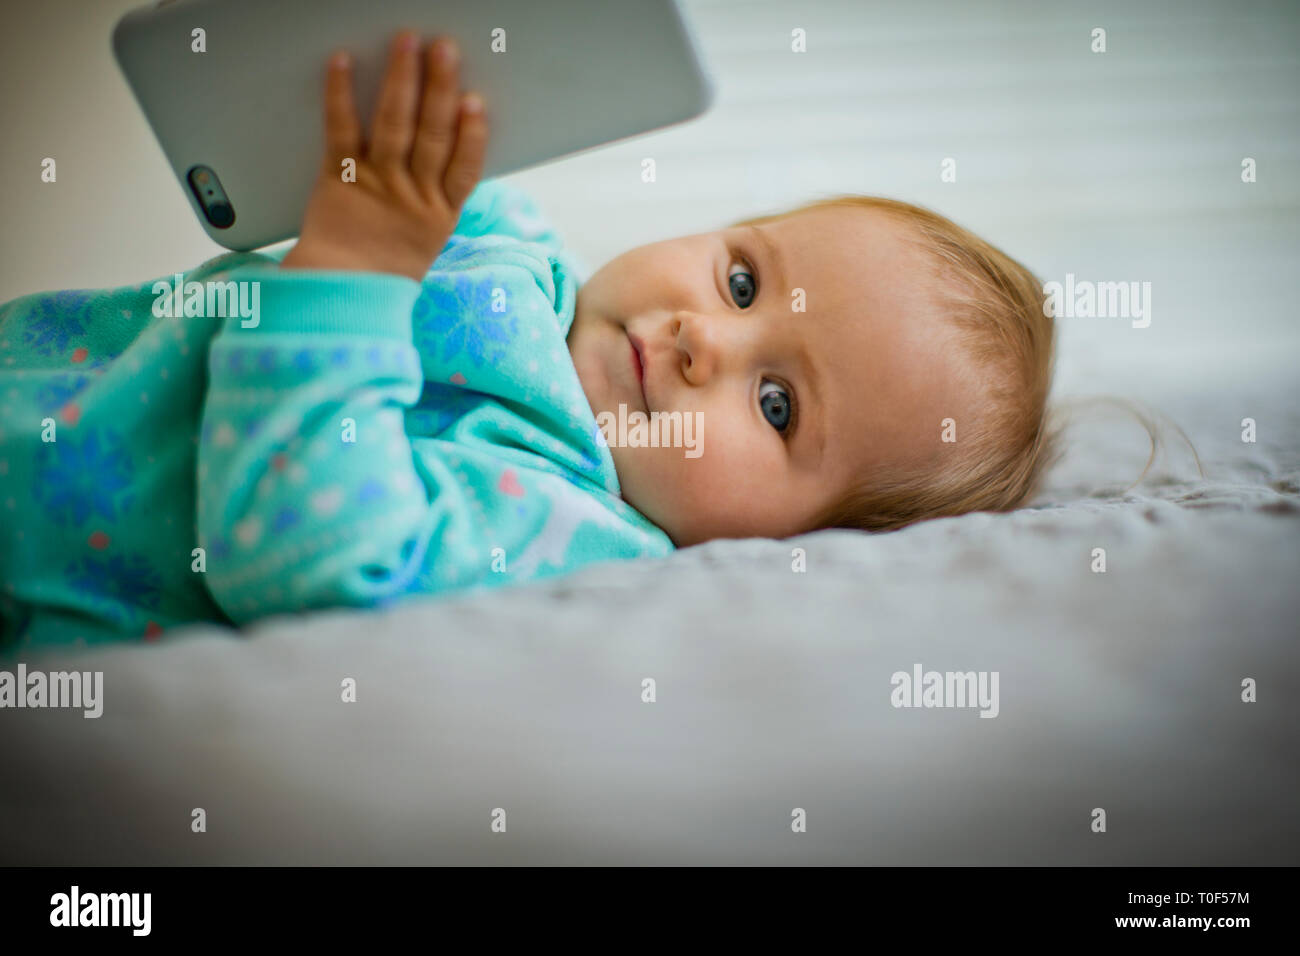 Baby girl playing with a cell phone. Stock Photo